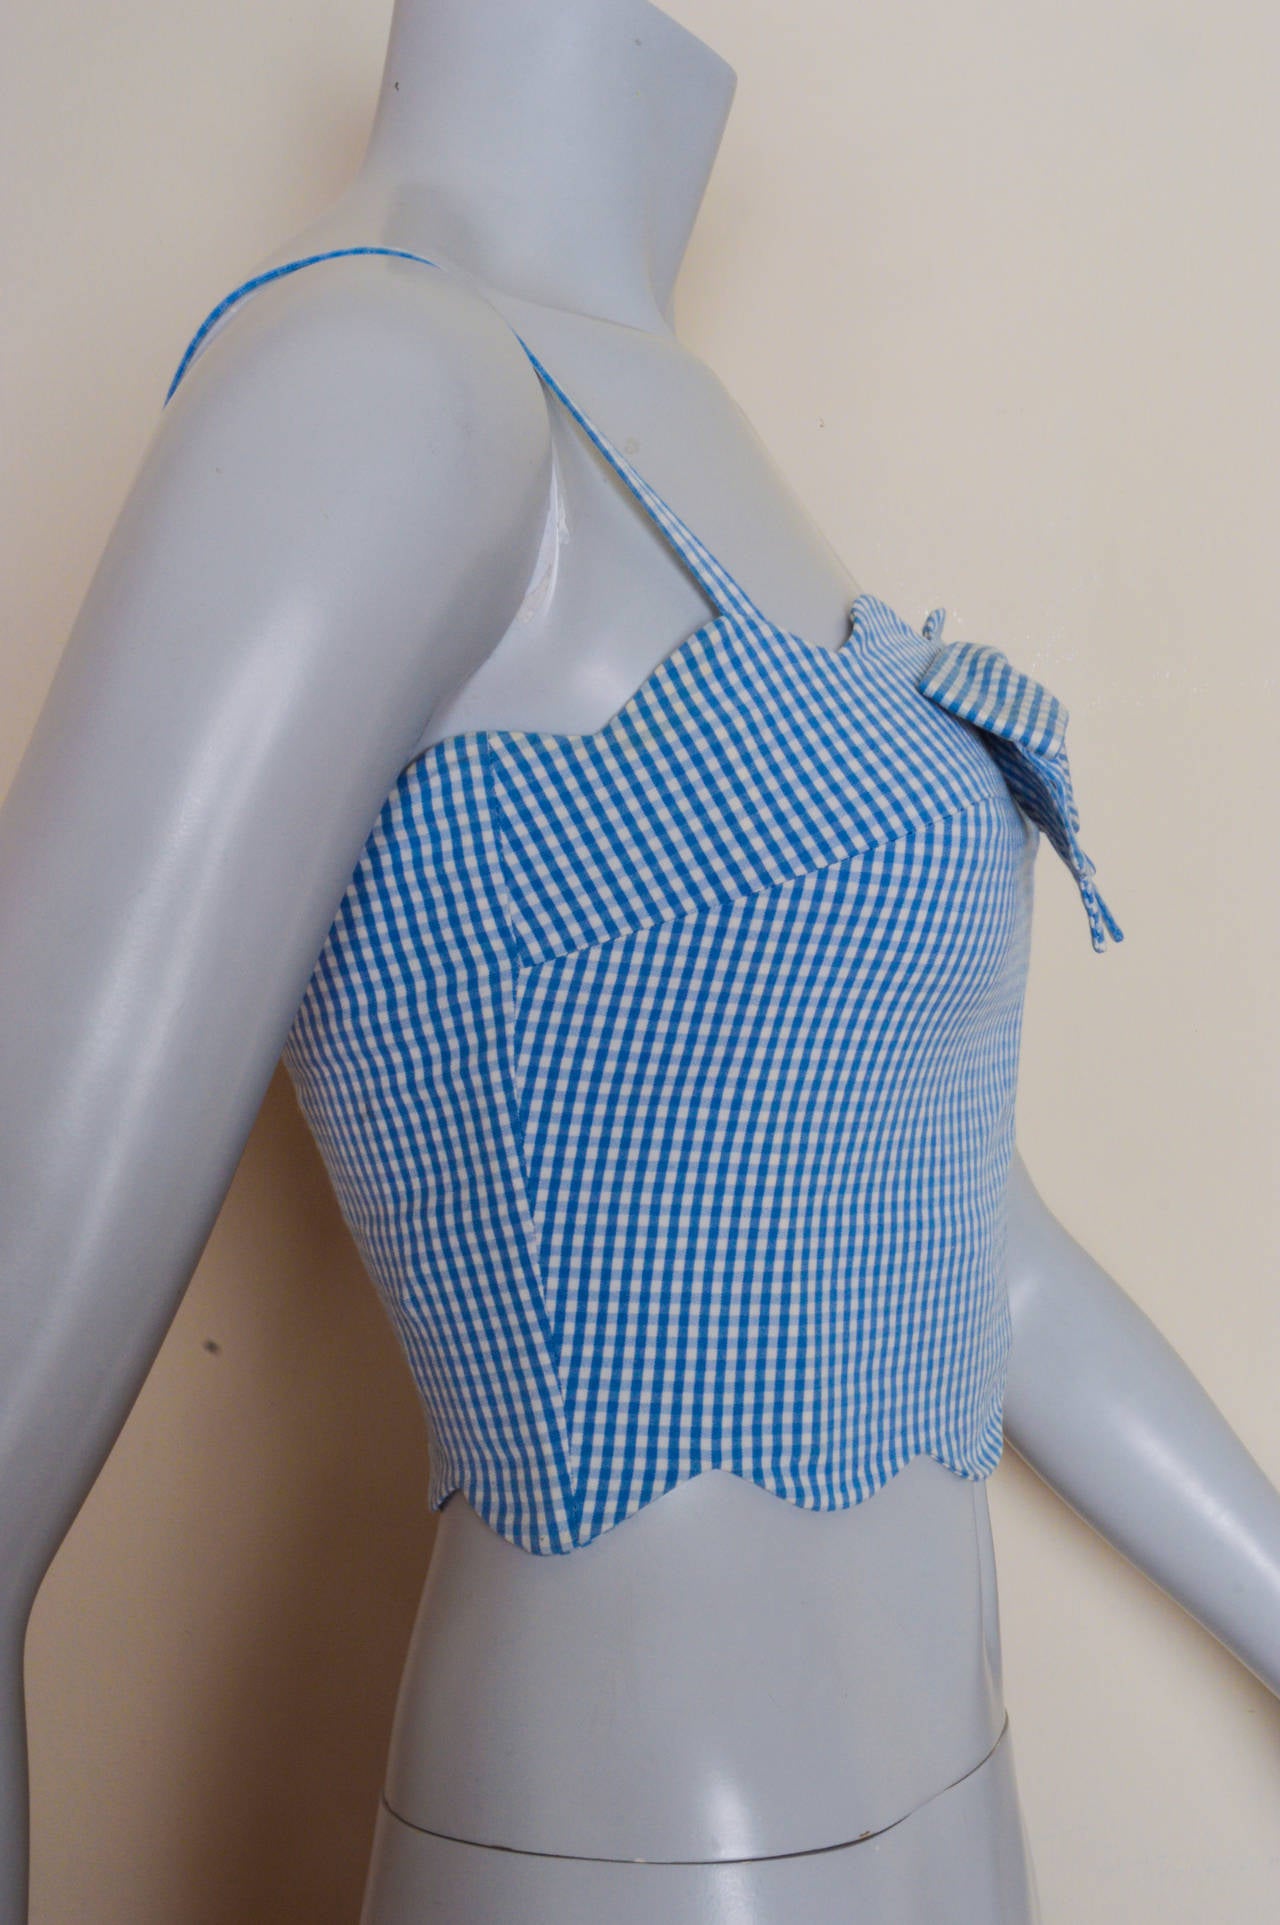 Moschino Cheap & Chic Gingham Bustier Top In Good Condition In Oakland, CA